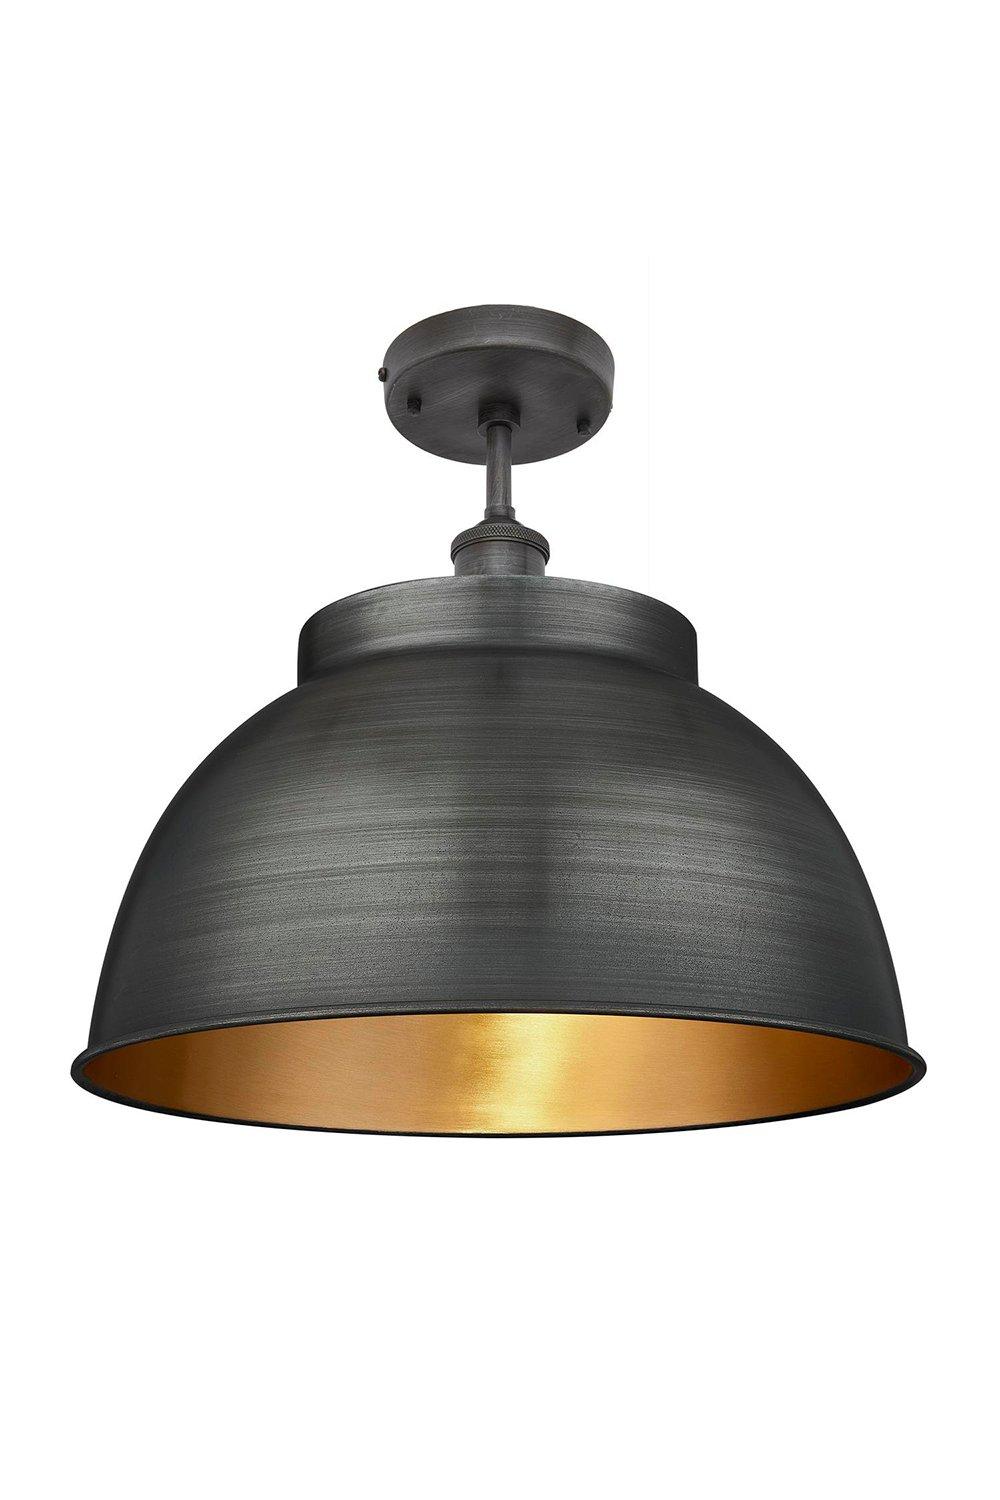 Brooklyn Dome Flush Mount, 17 Inch, Pewter & Brass, Pewter Holder